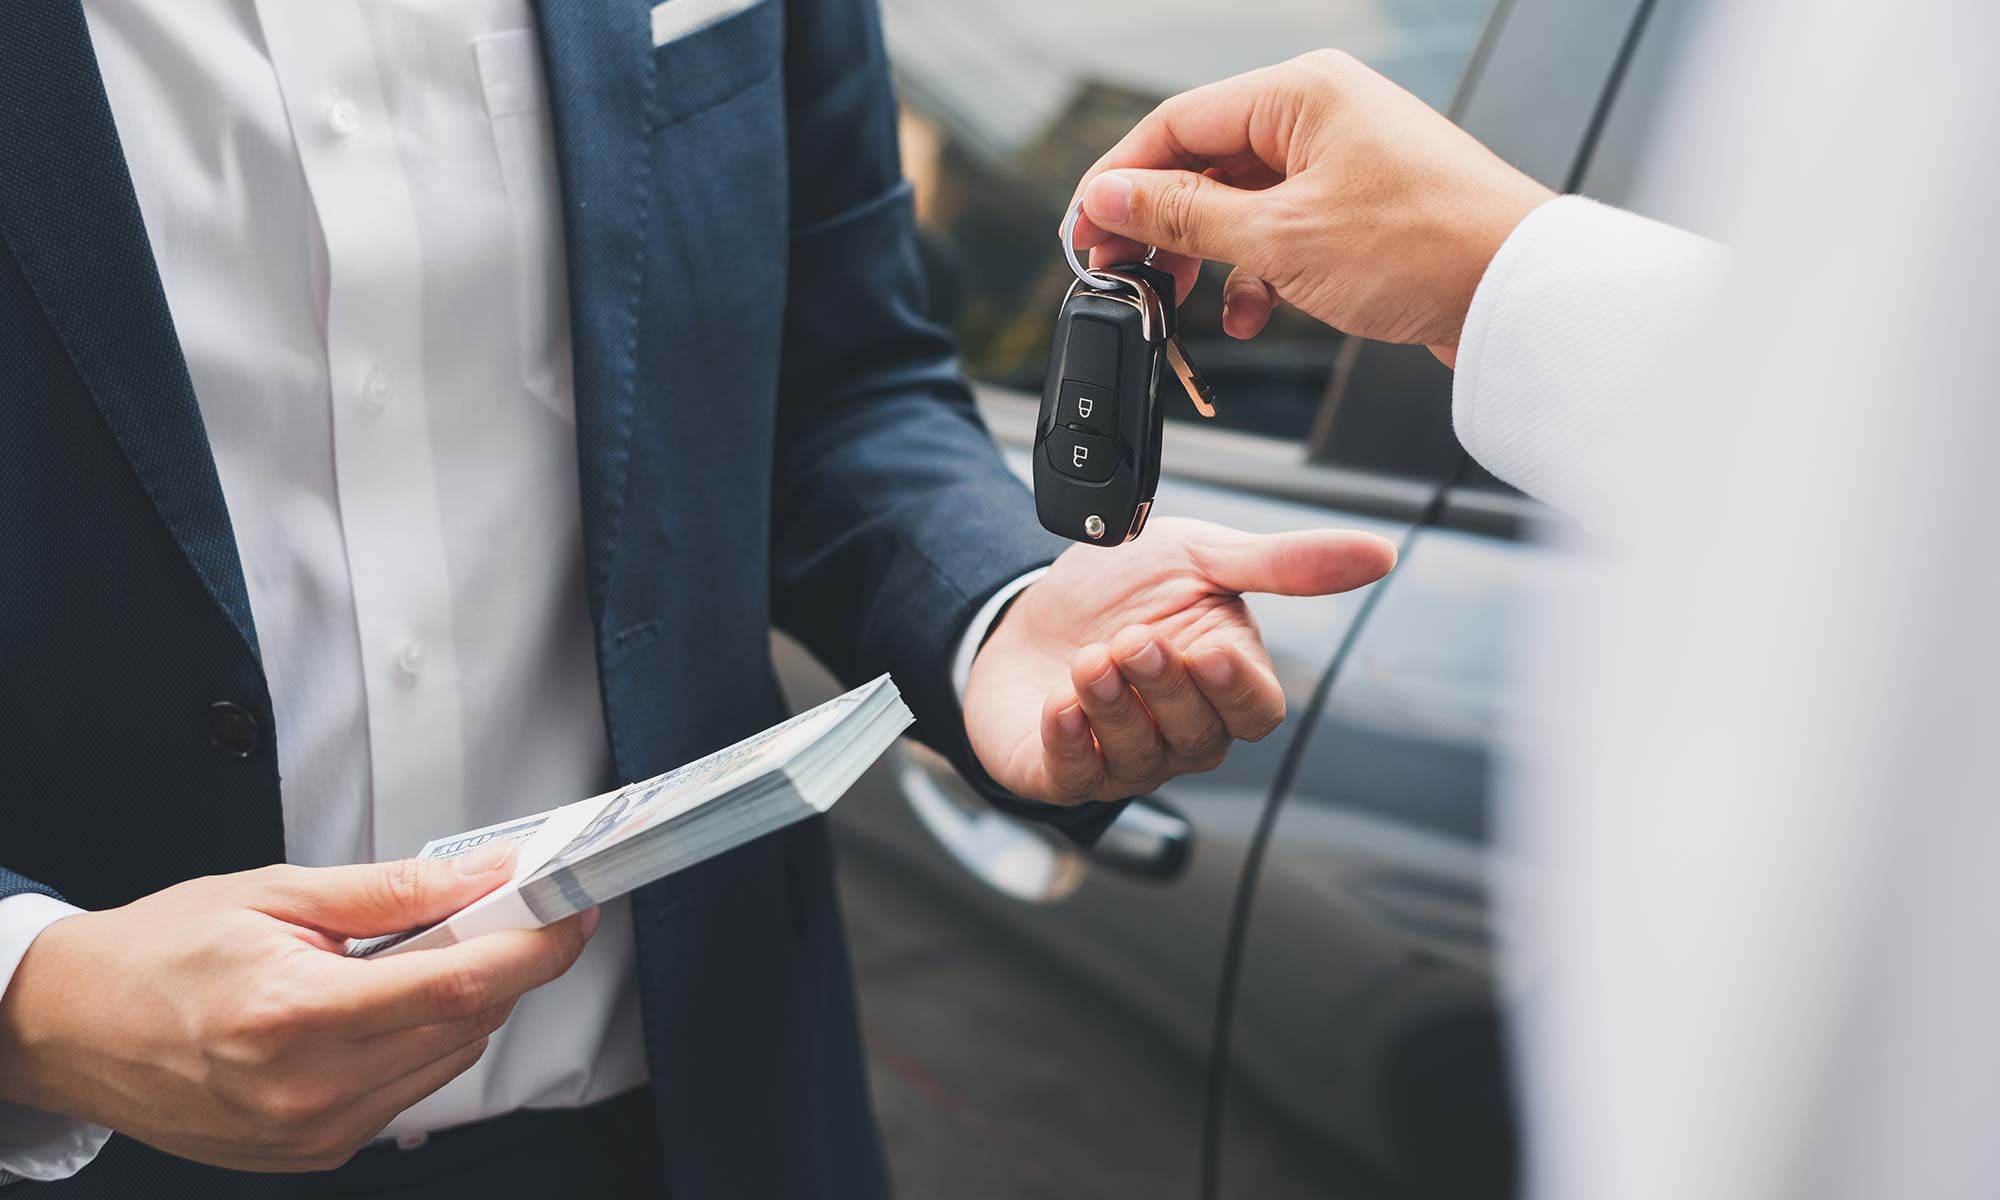 A salesperson hands the keys to a vehicle to a customer.